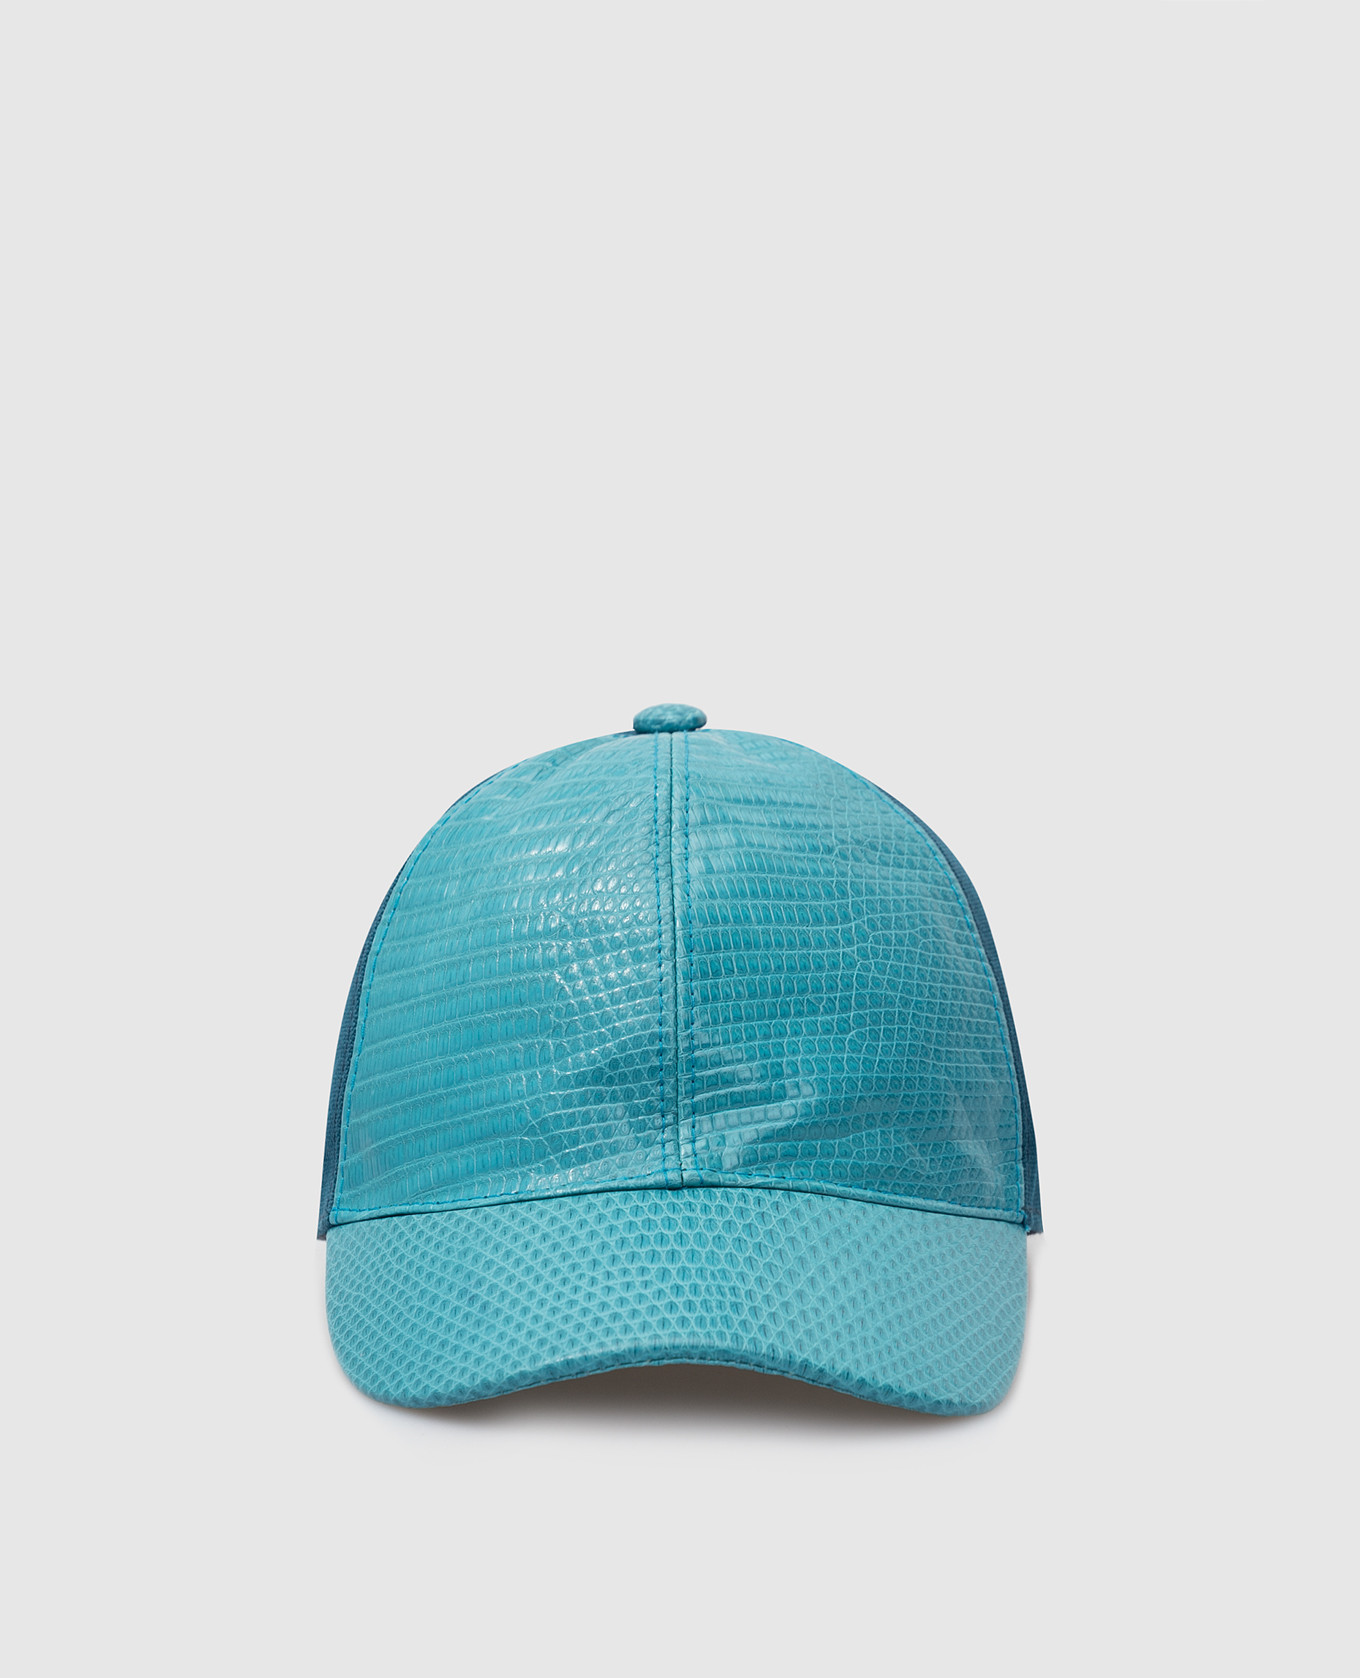 Children's dark turquoise cap with leather inserts